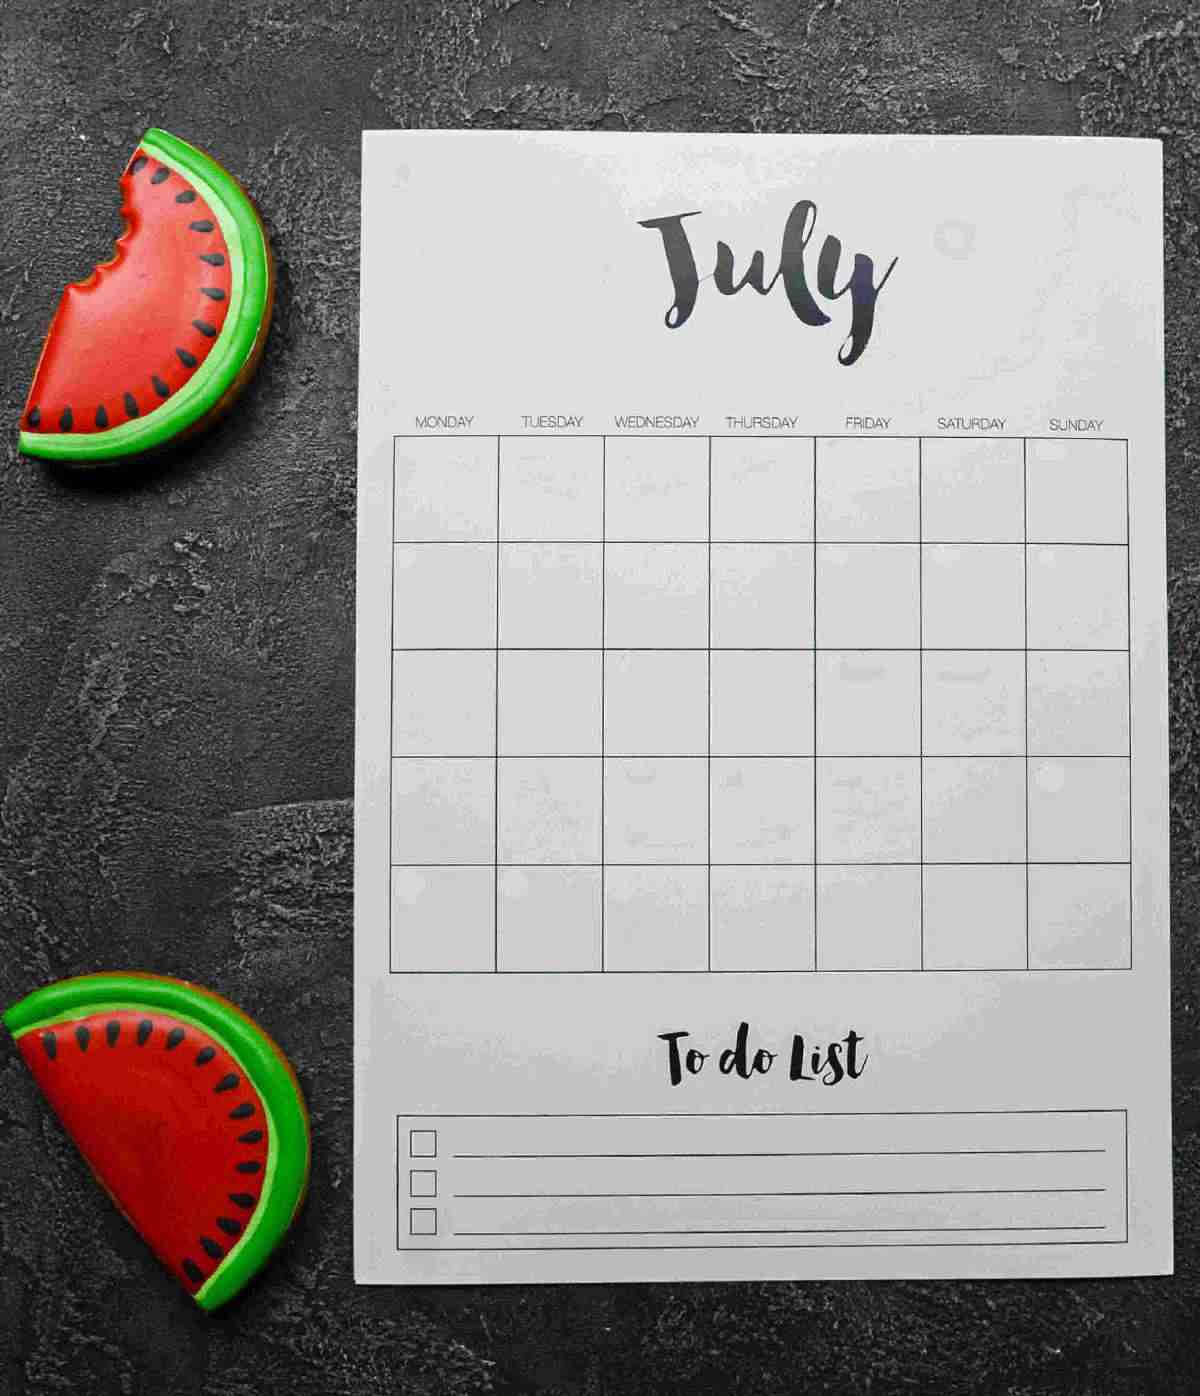 Watermelon slices and a July to do list page